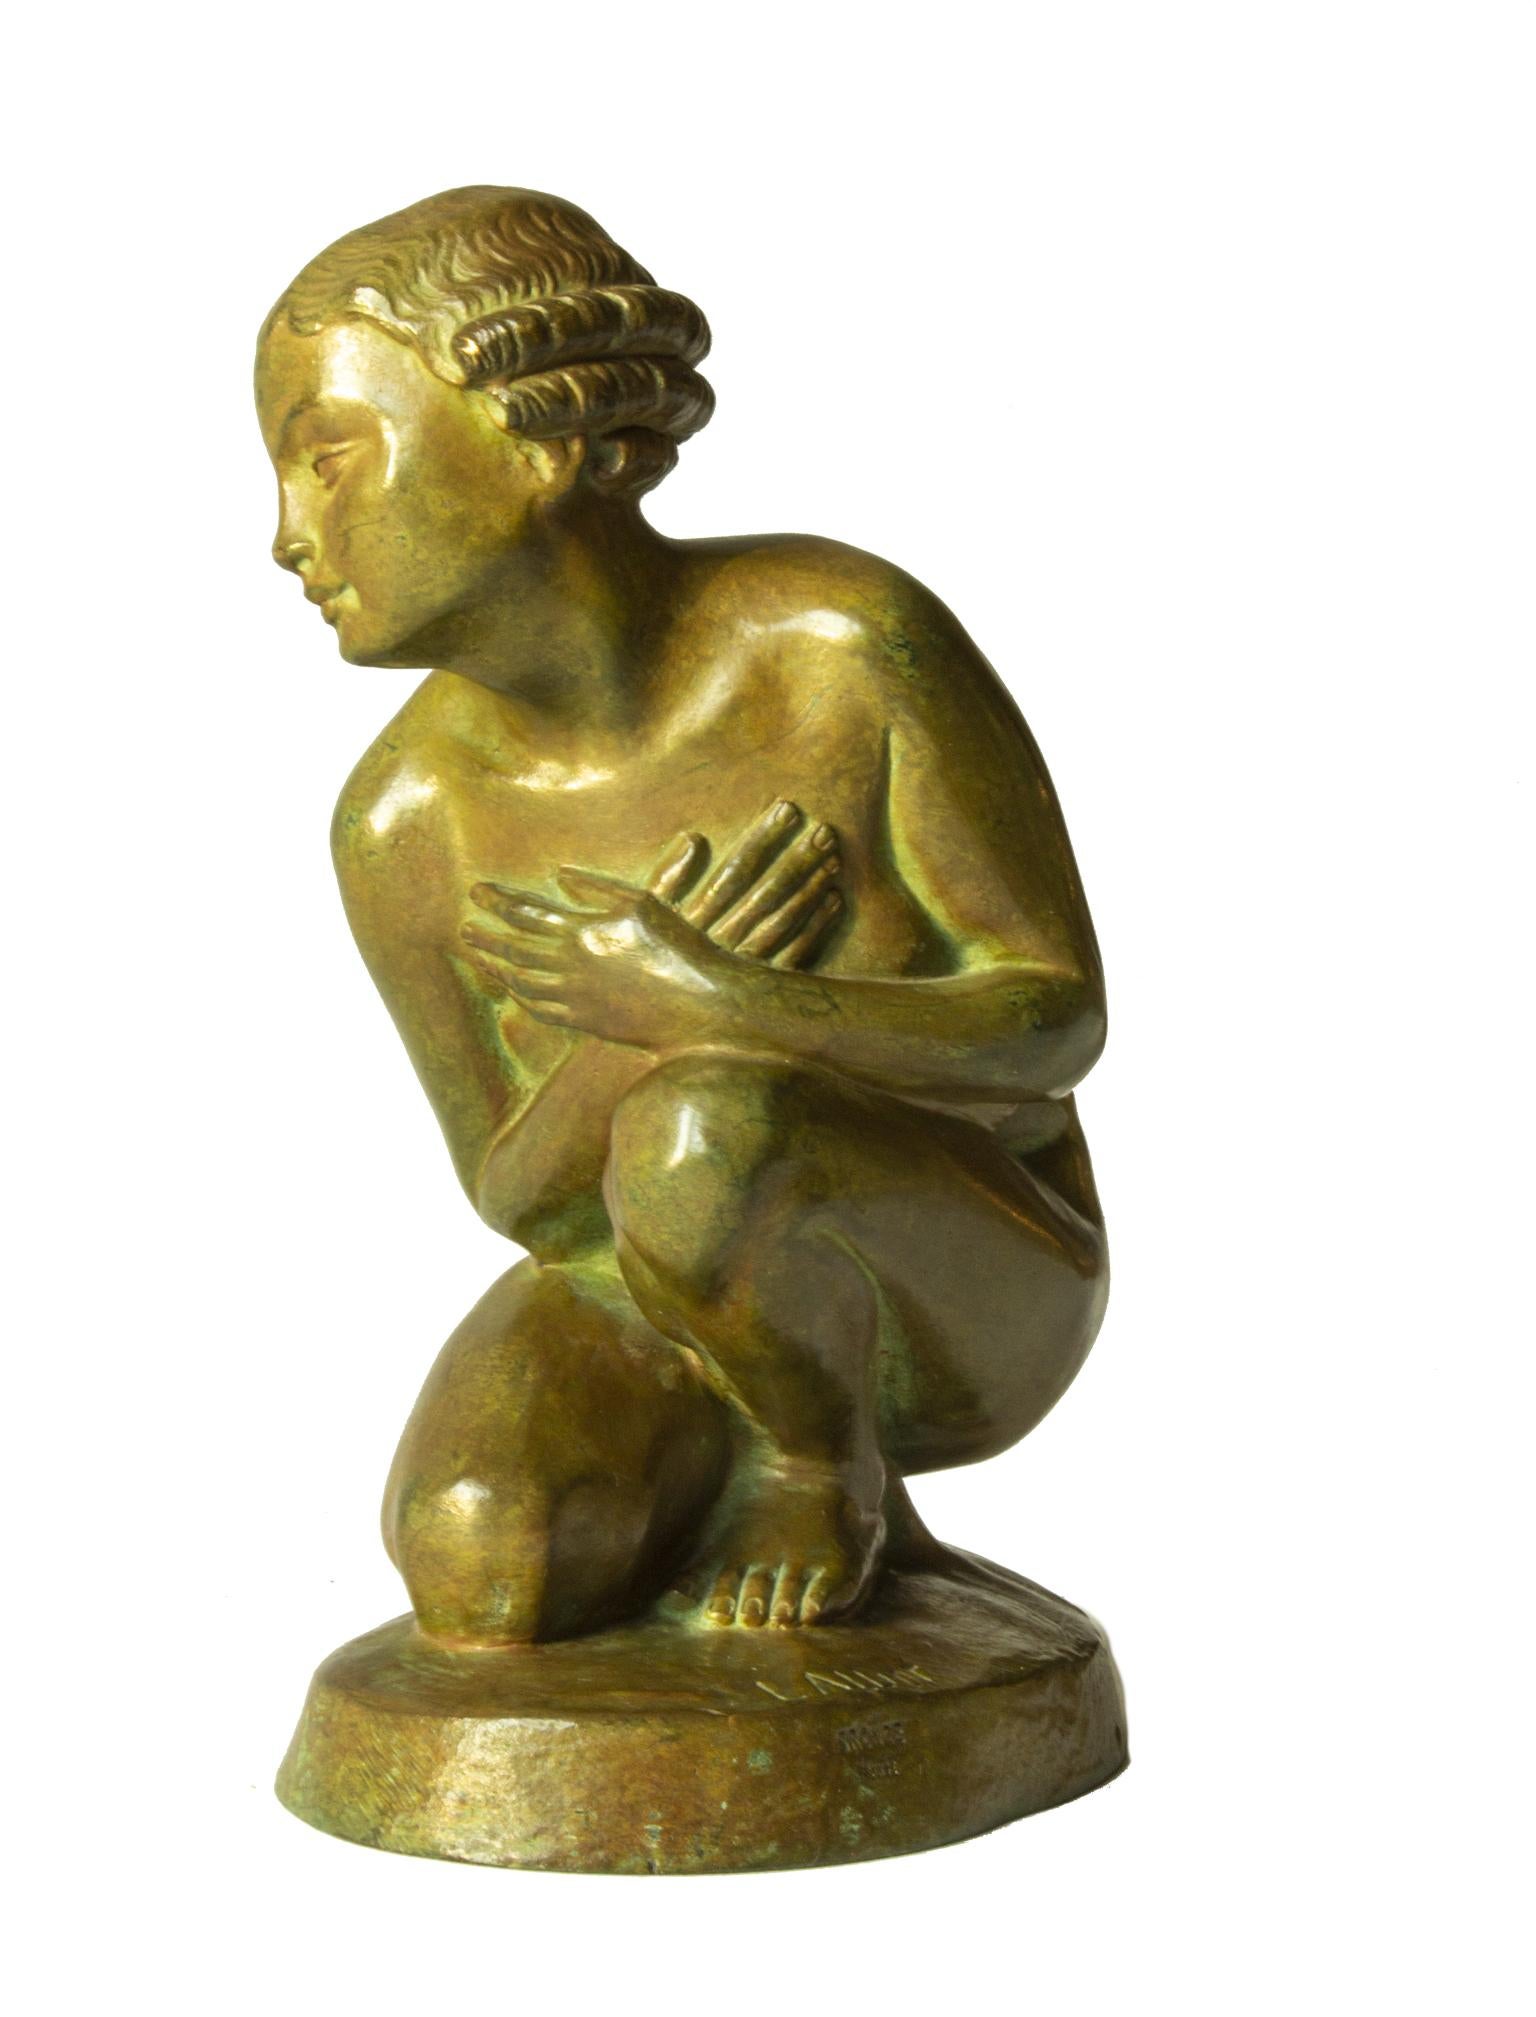 Cast French Art Deco Bronze Figure of a Nude by Lucien Charles Edouard Alliot